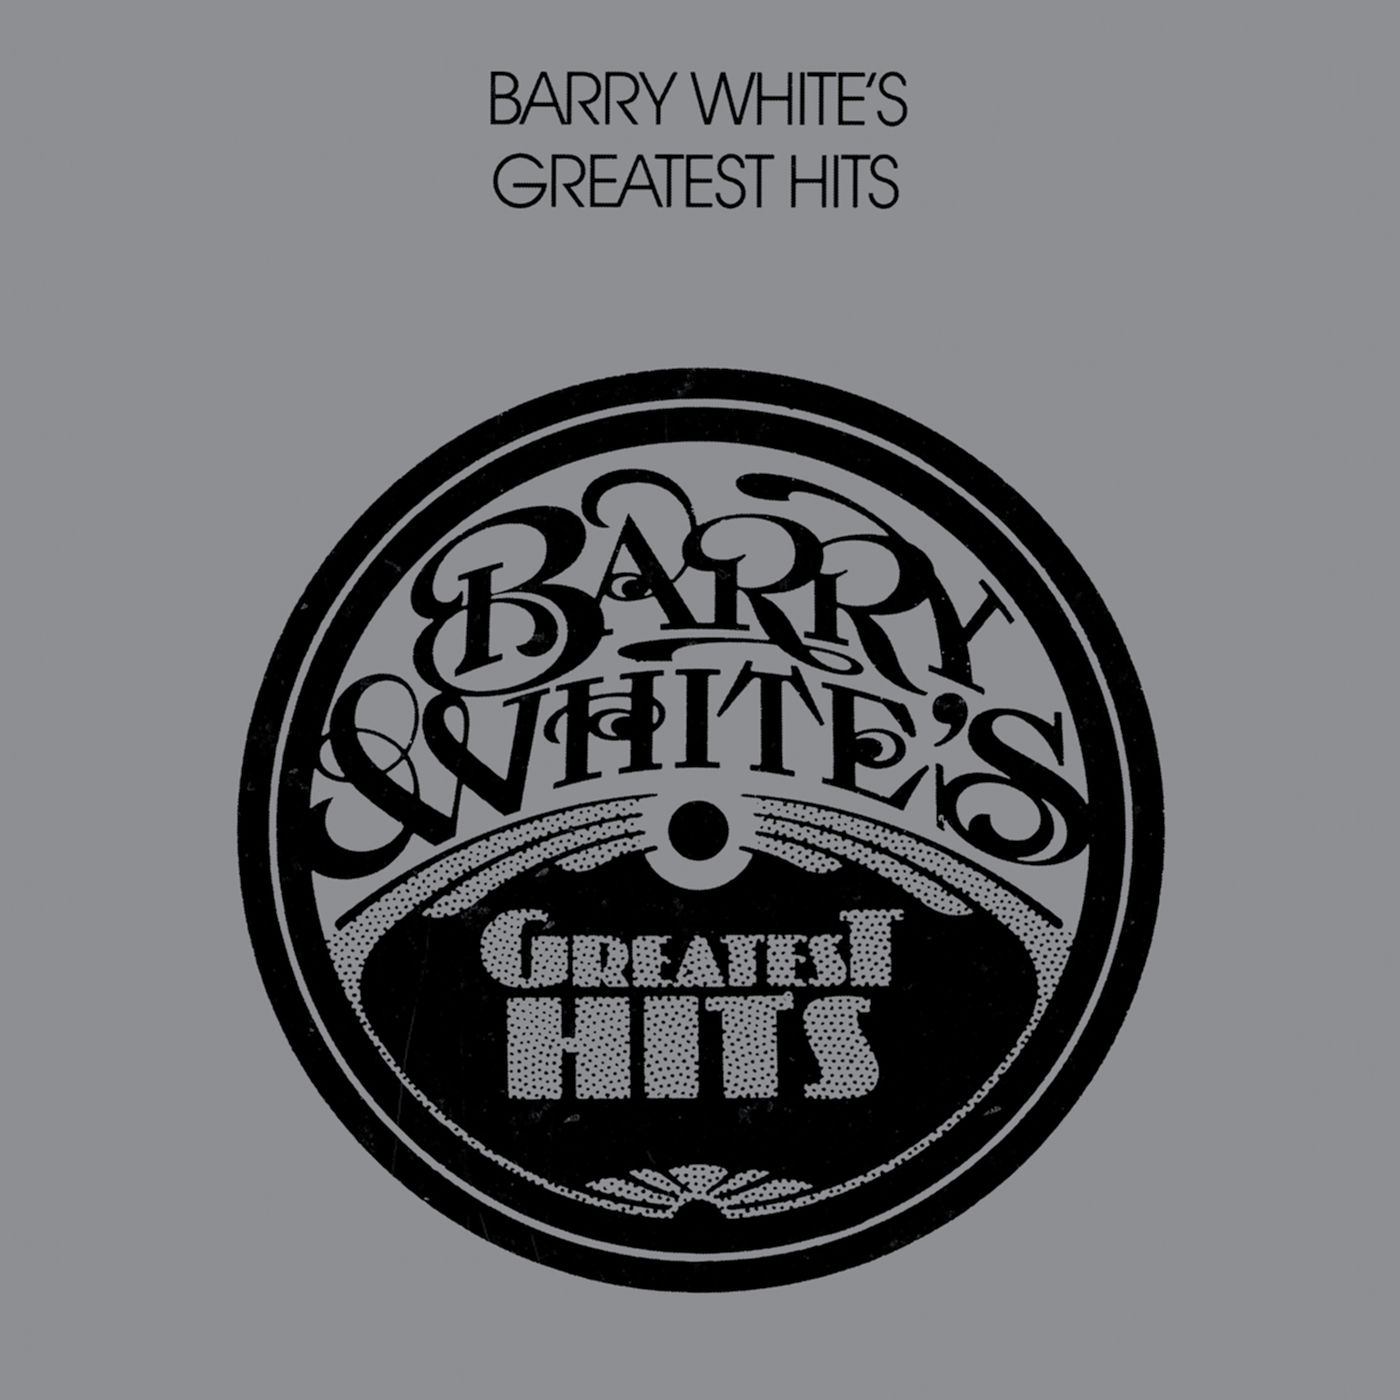 Barry White – Barry White’s Greatest Hits (1975/2021) [FLAC 24bit/96kHz]